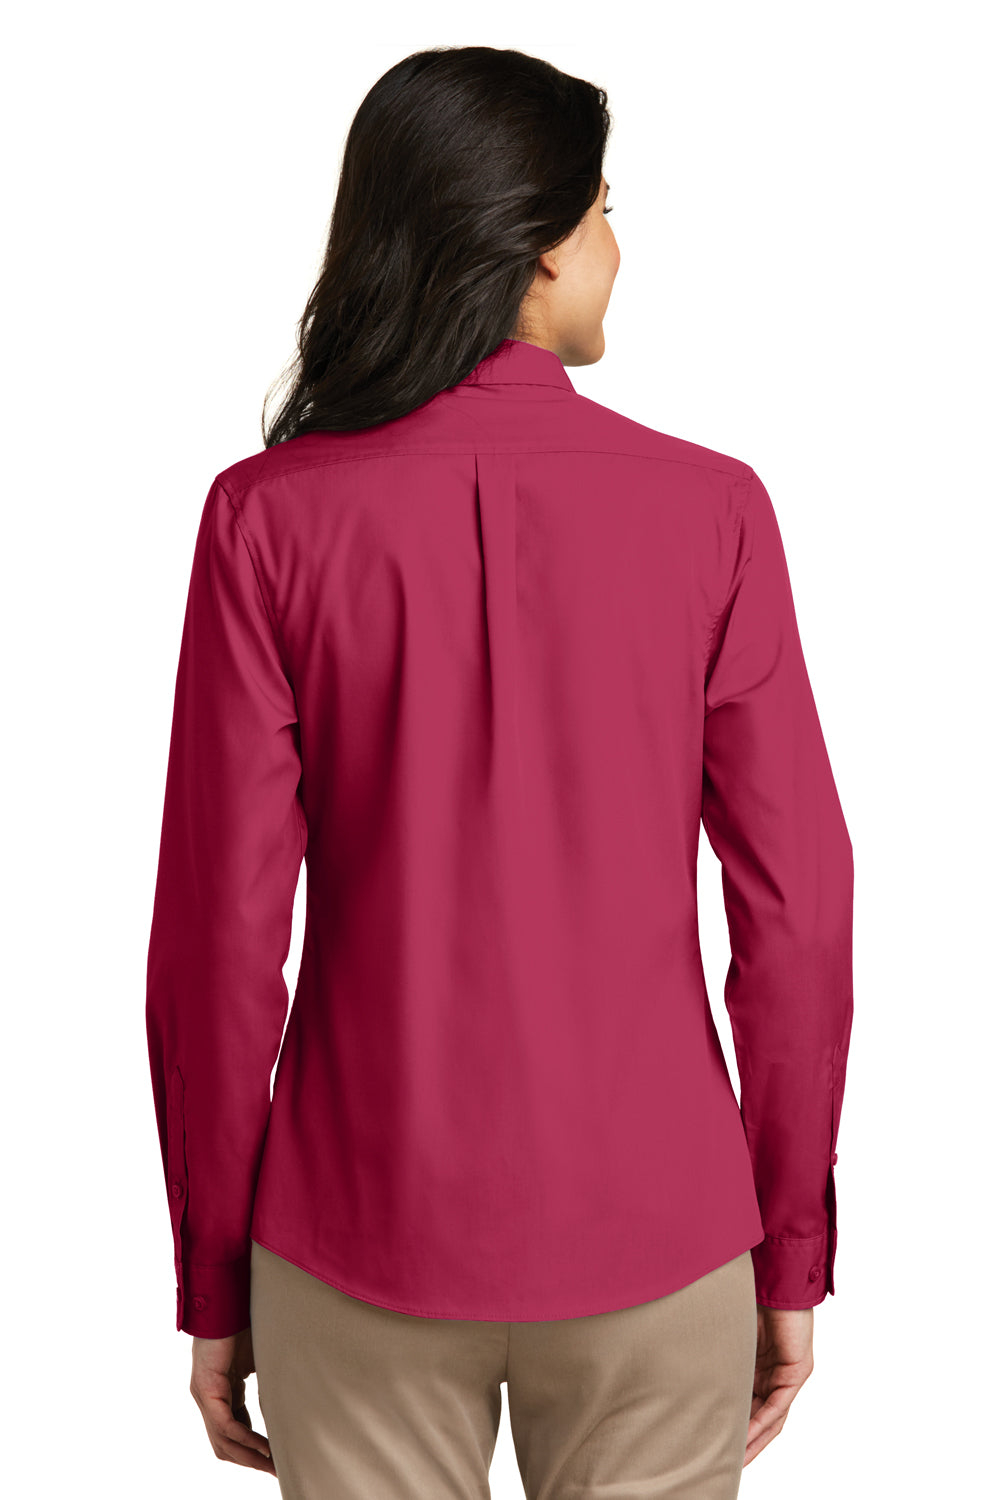 Port Authority LW100 Womens Carefree Stain Resistant Long Sleeve Button Down Shirt Azalea Pink Back